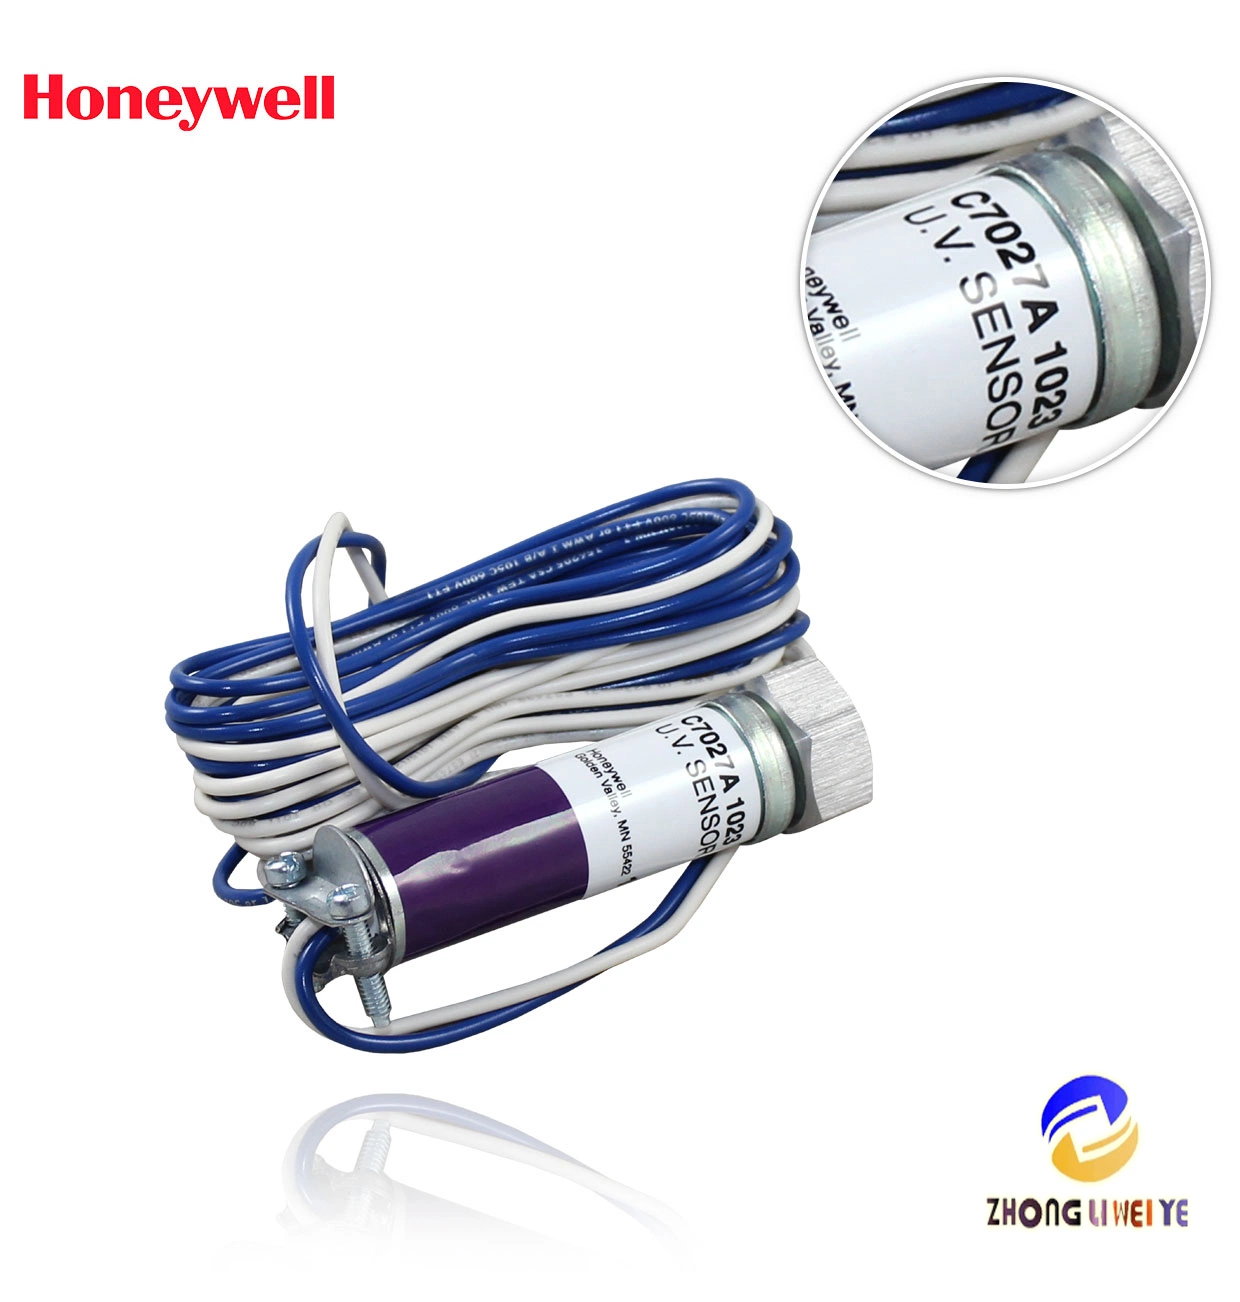 Honeywell Flame Detector Burner UV Battery Directly Supplied by Chinese Factory for C70 Series Industrial Burner Accessories